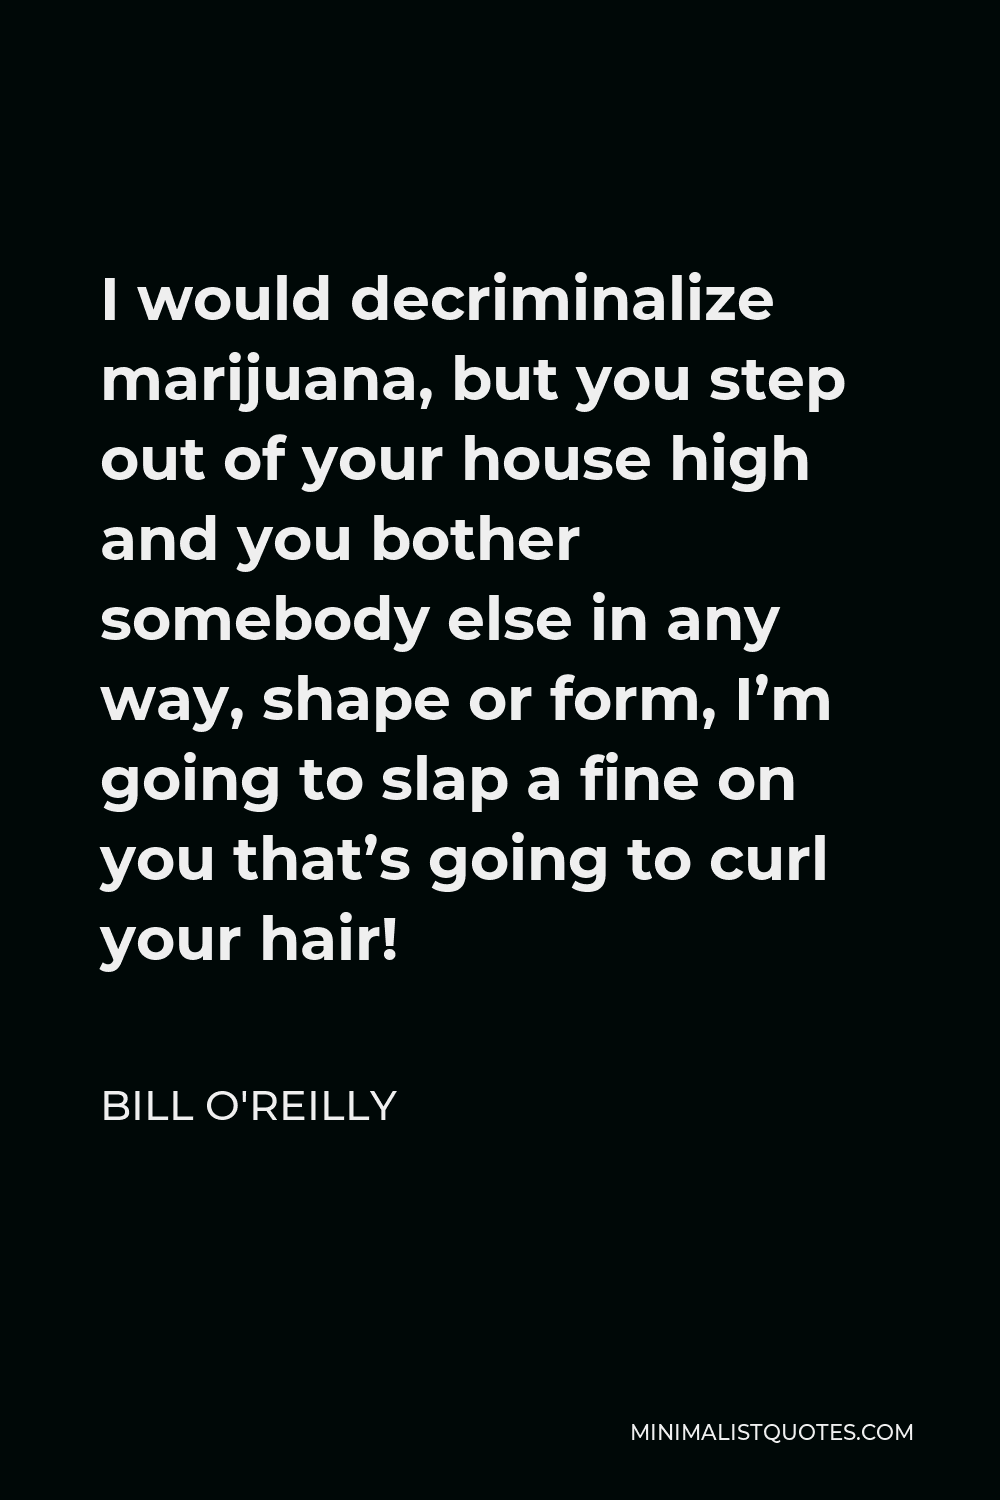 Bill O'Reilly Quote - I would decriminalize marijuana, but you step out of your house high and you bother somebody else in any way, shape or form, I’m going to slap a fine on you that’s going to curl your hair!